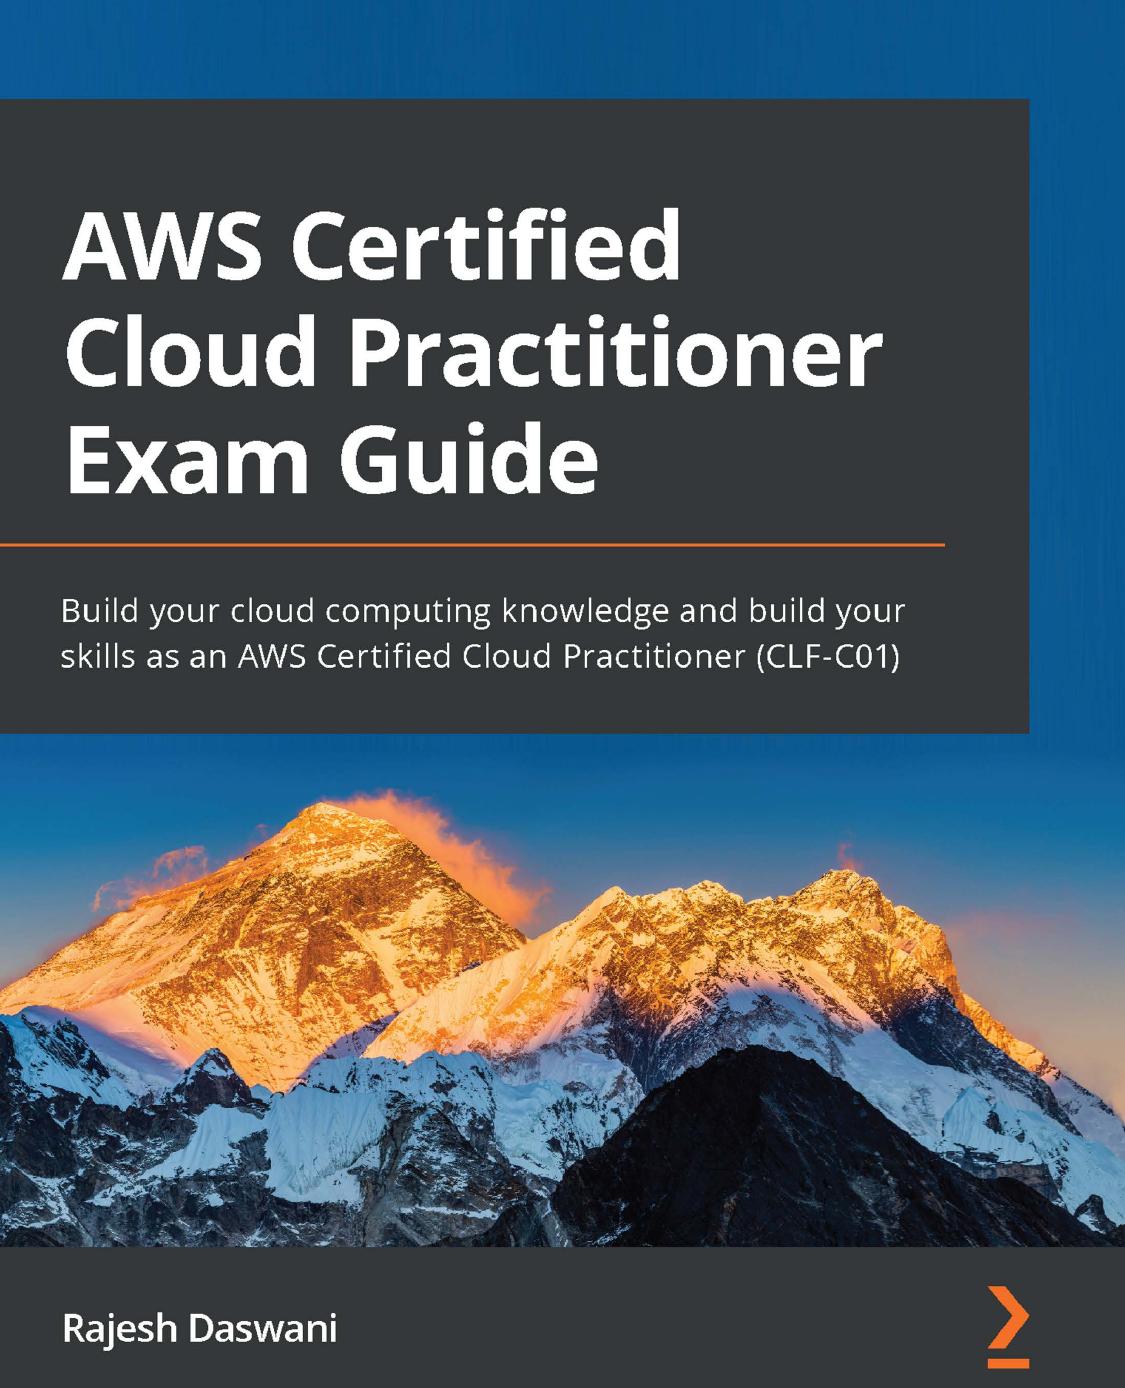 AWS Certified Cloud Practitioner Exam Guide: Build Your Cloud Computing Knowledge and Build Your Skills as an AWS Certified Cloud Practitioner